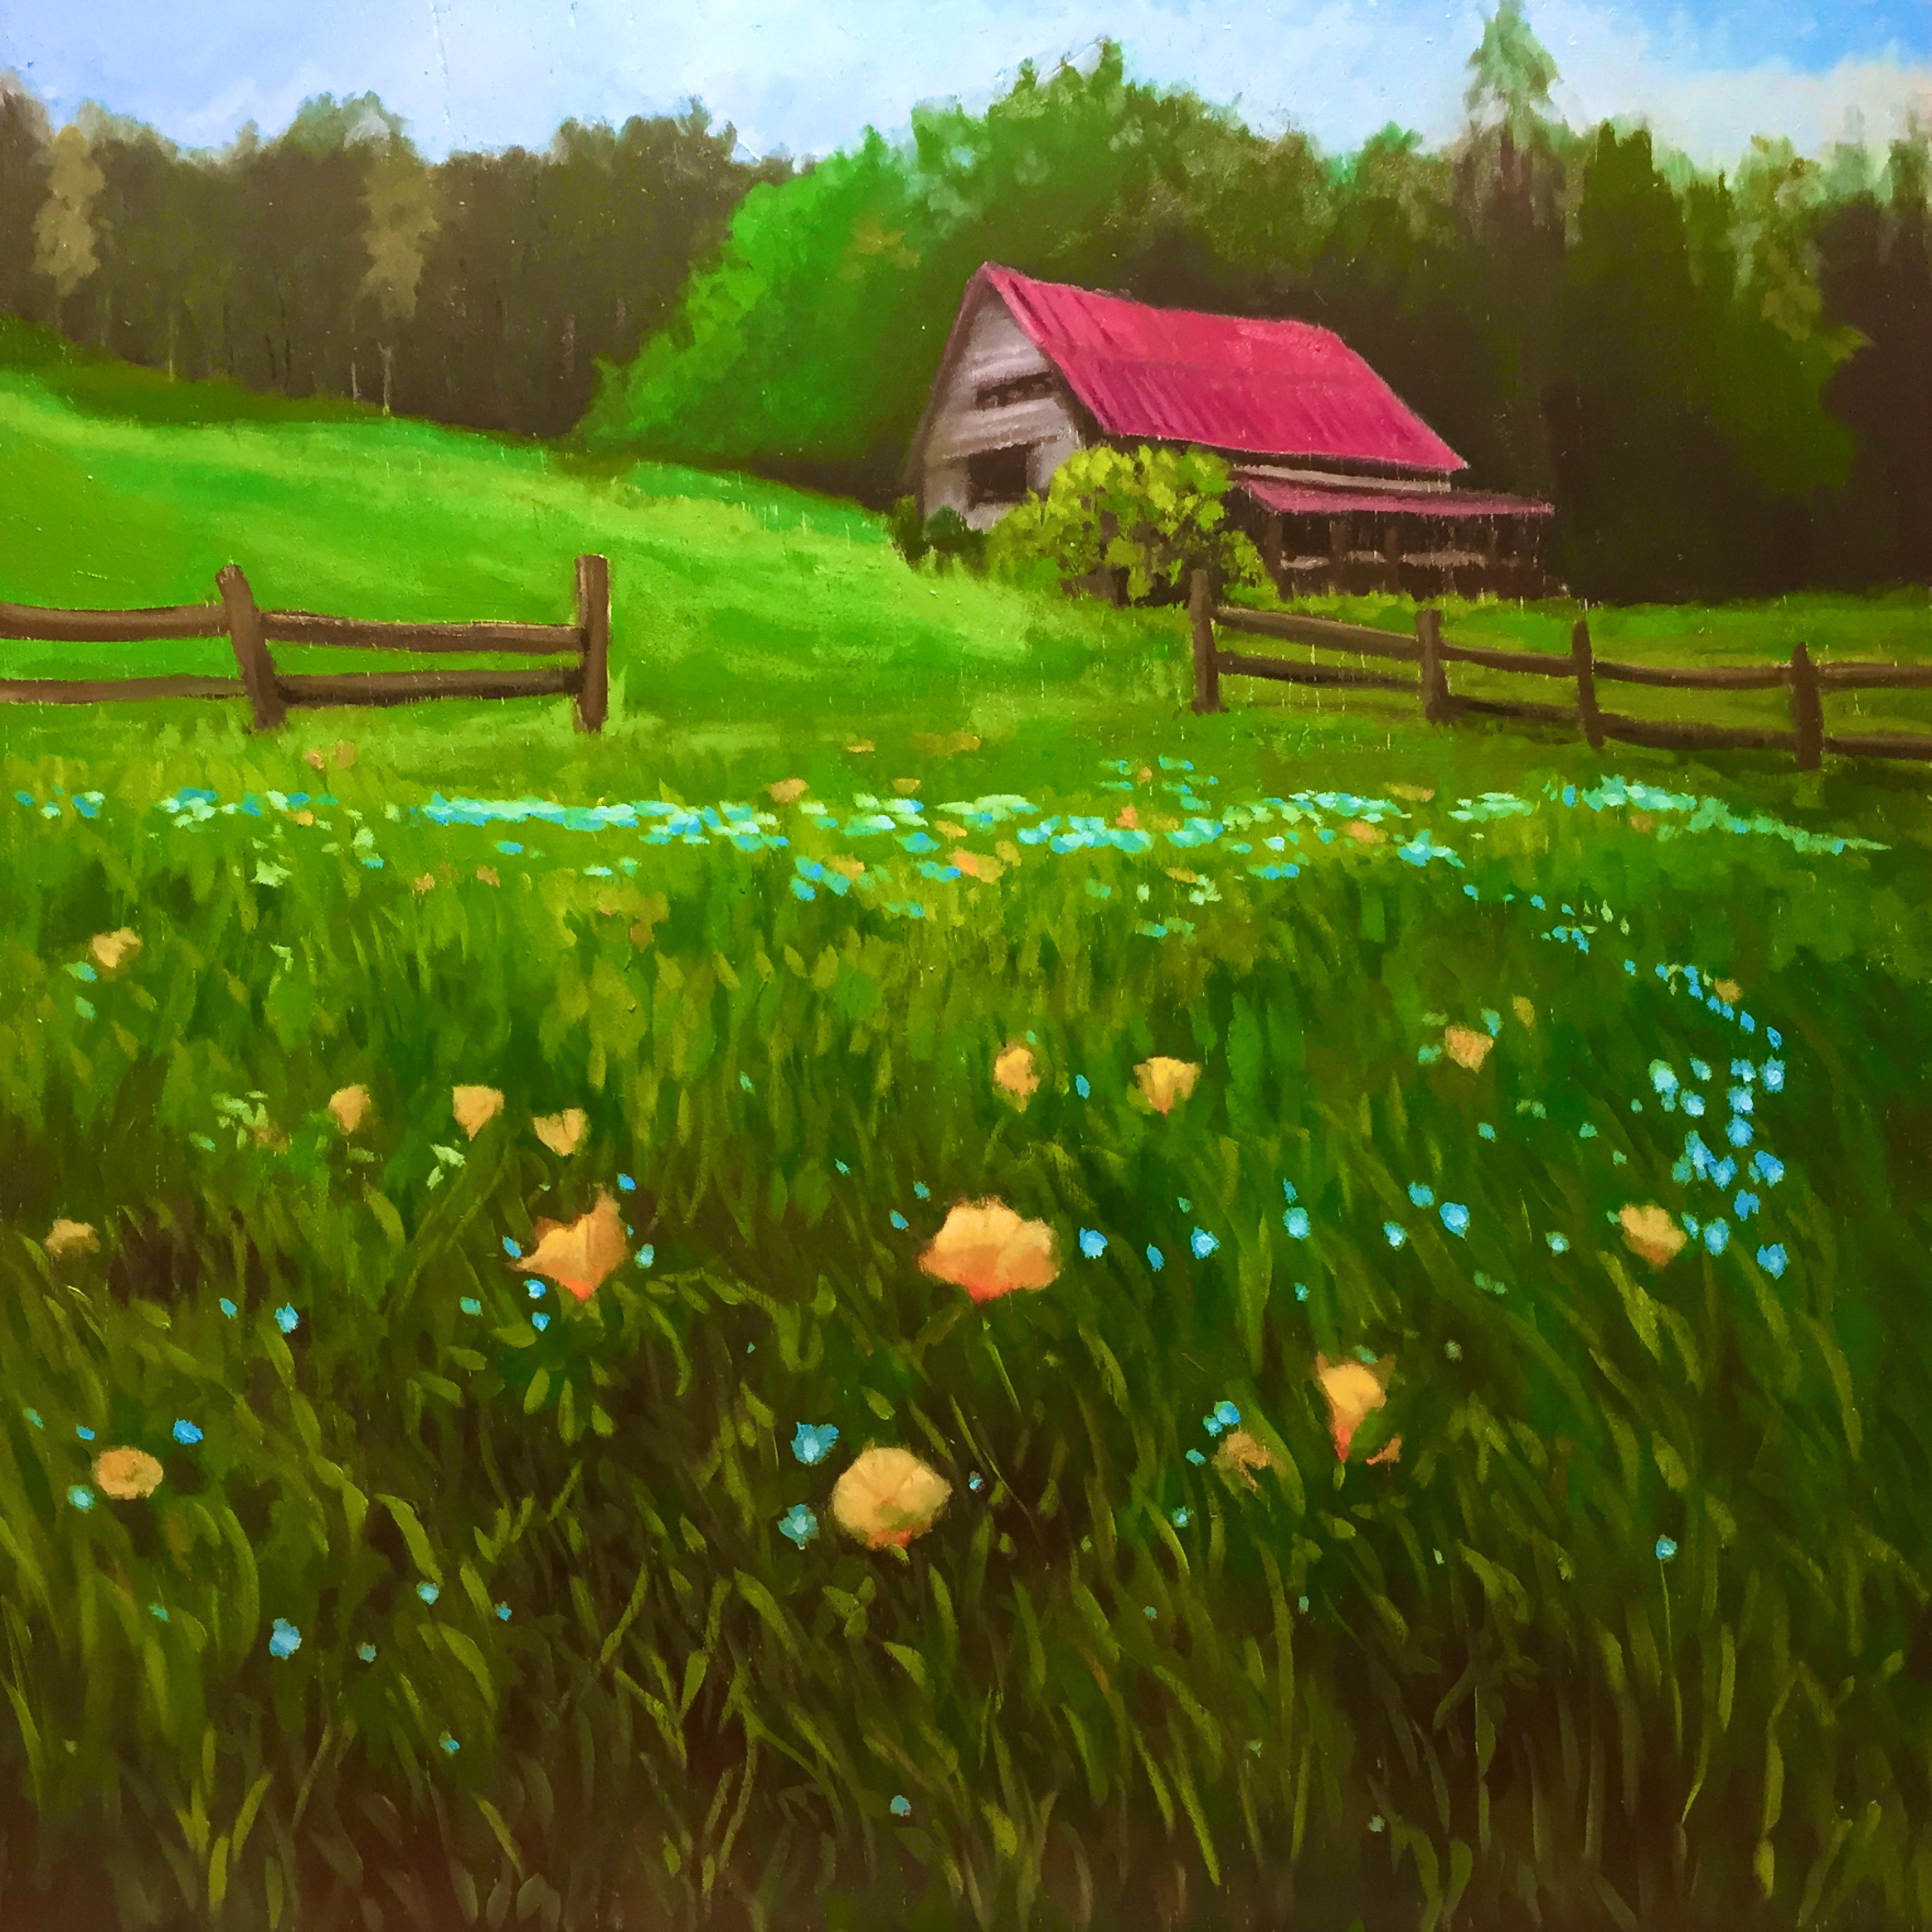 Pink Roof and Wildflowers Impressionist Landscape by Hilary J. England, American artist